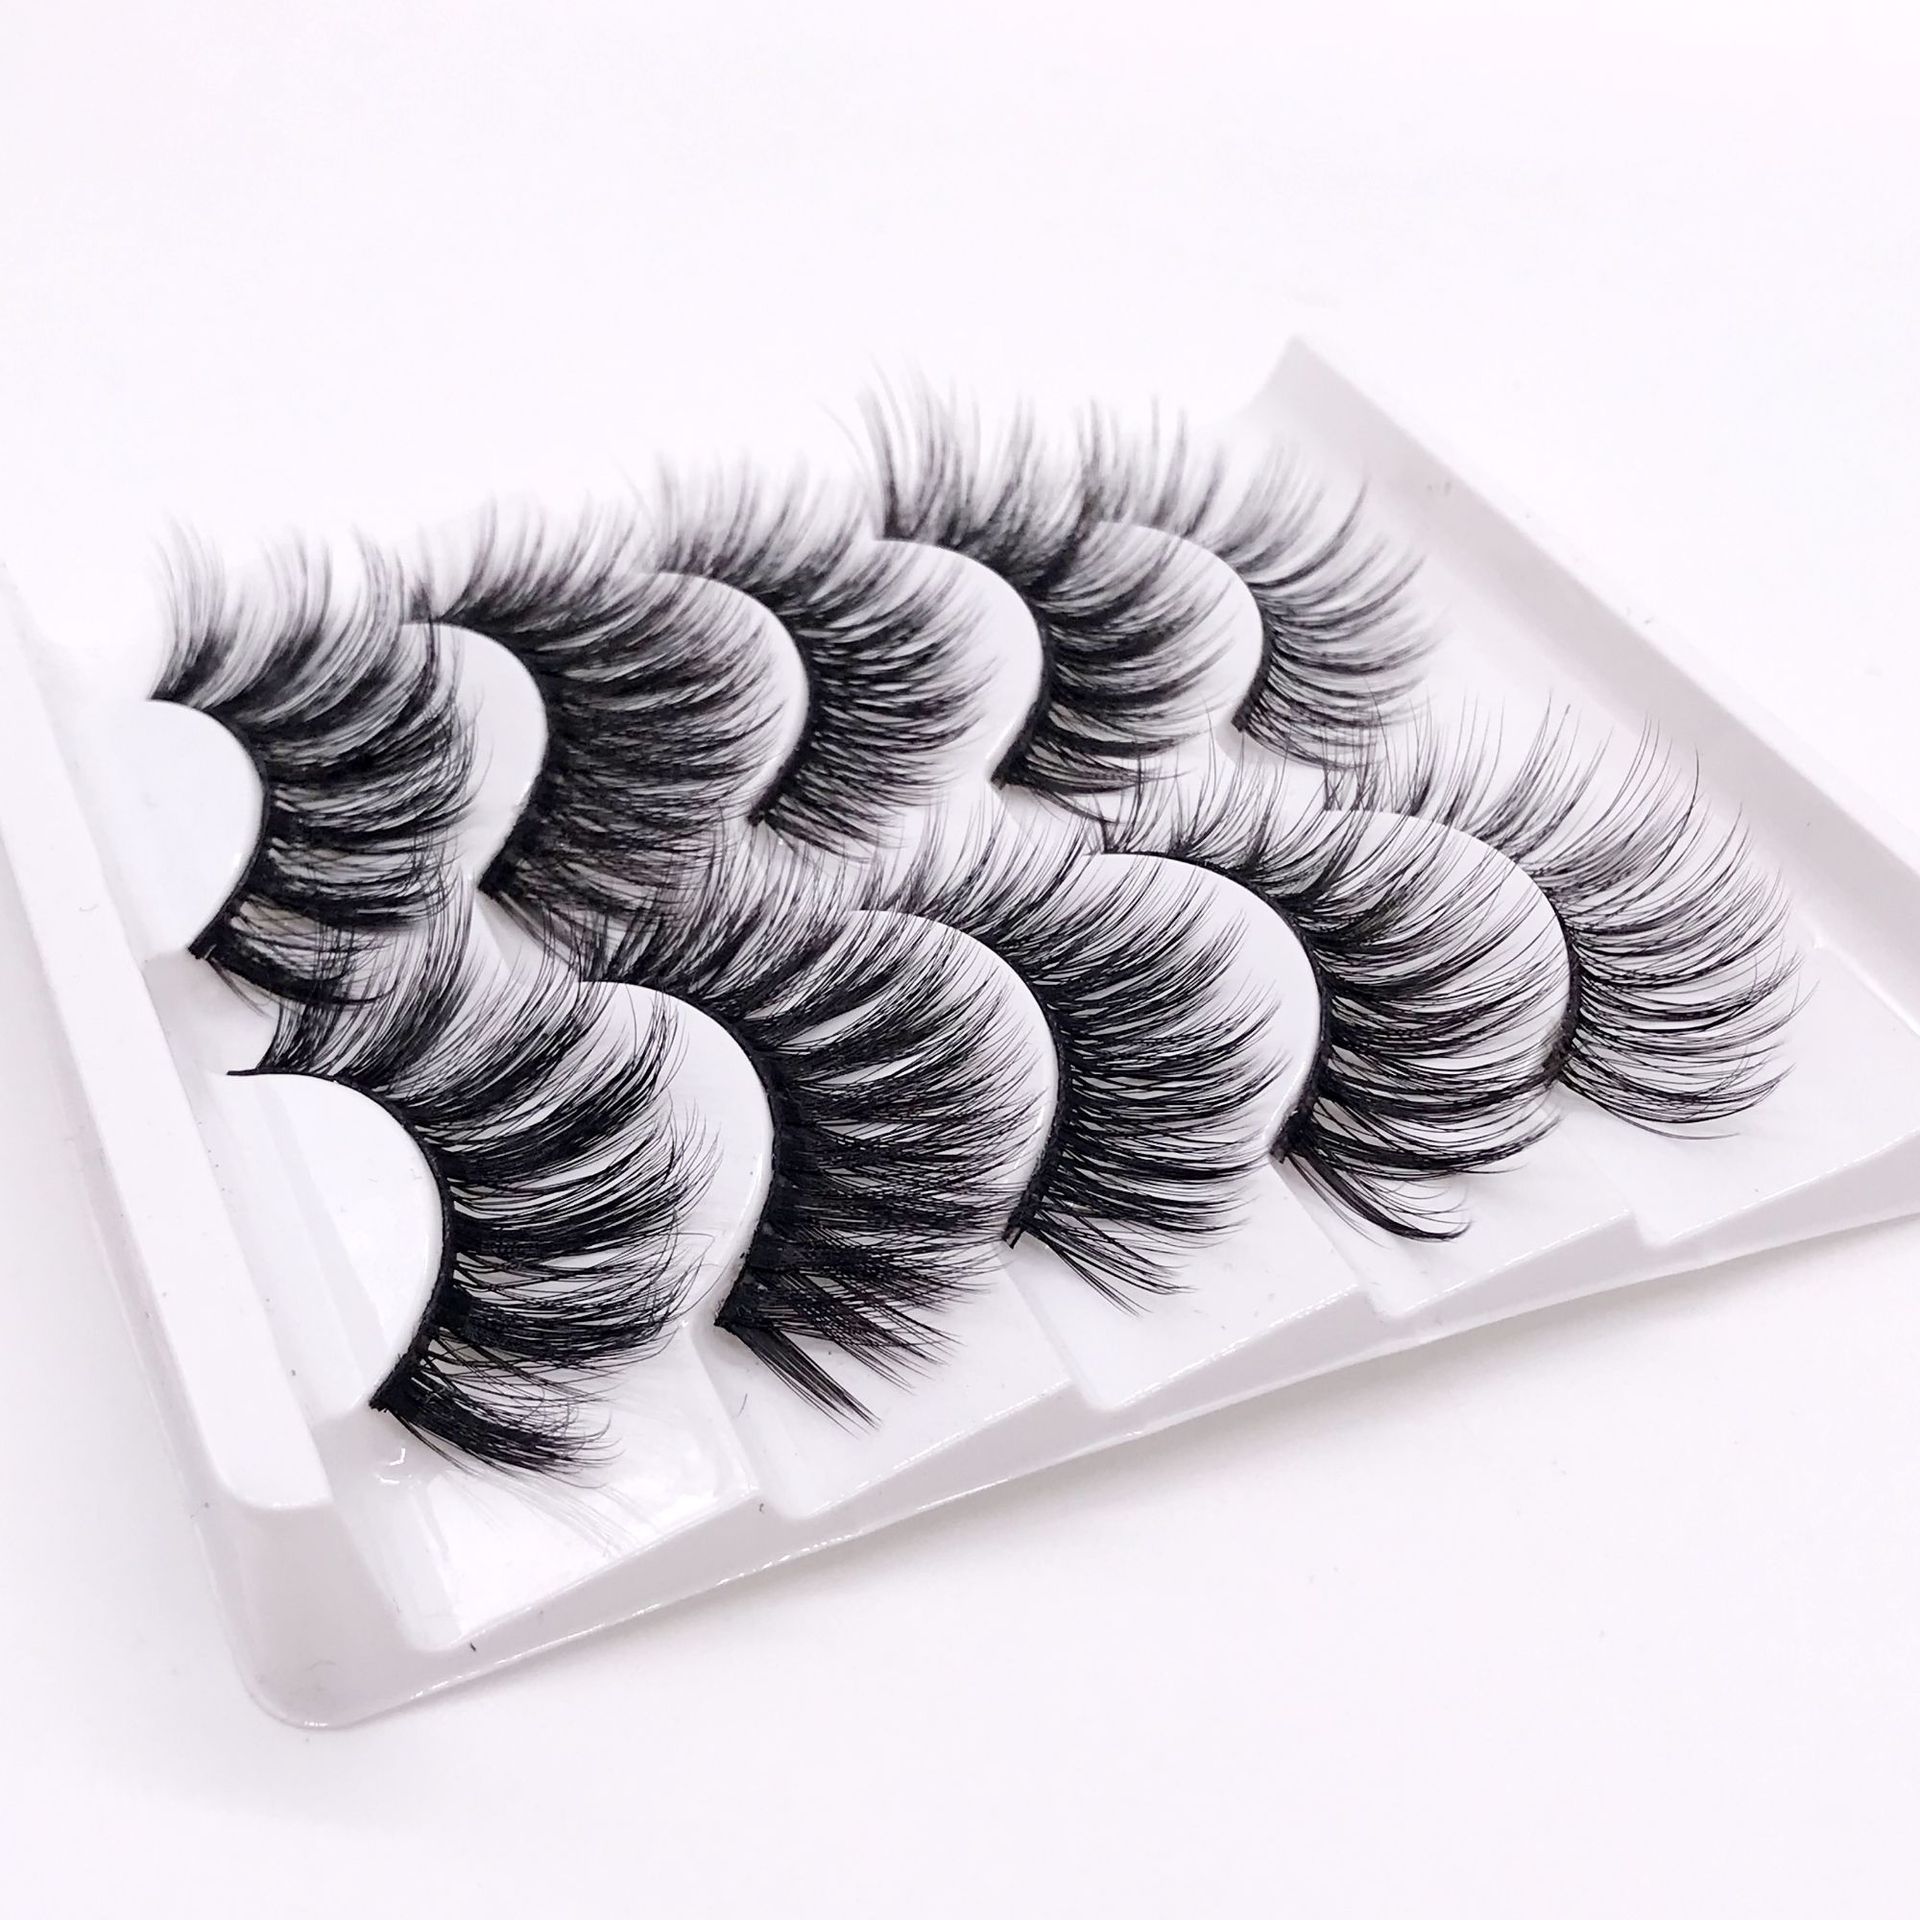 In Stock Wholesale 5 Double Pairs of False Eyelashes 3D Chemical Fiber Three-Dimensional Thick Five Pairs Mixed False Eyelashes Source Factory